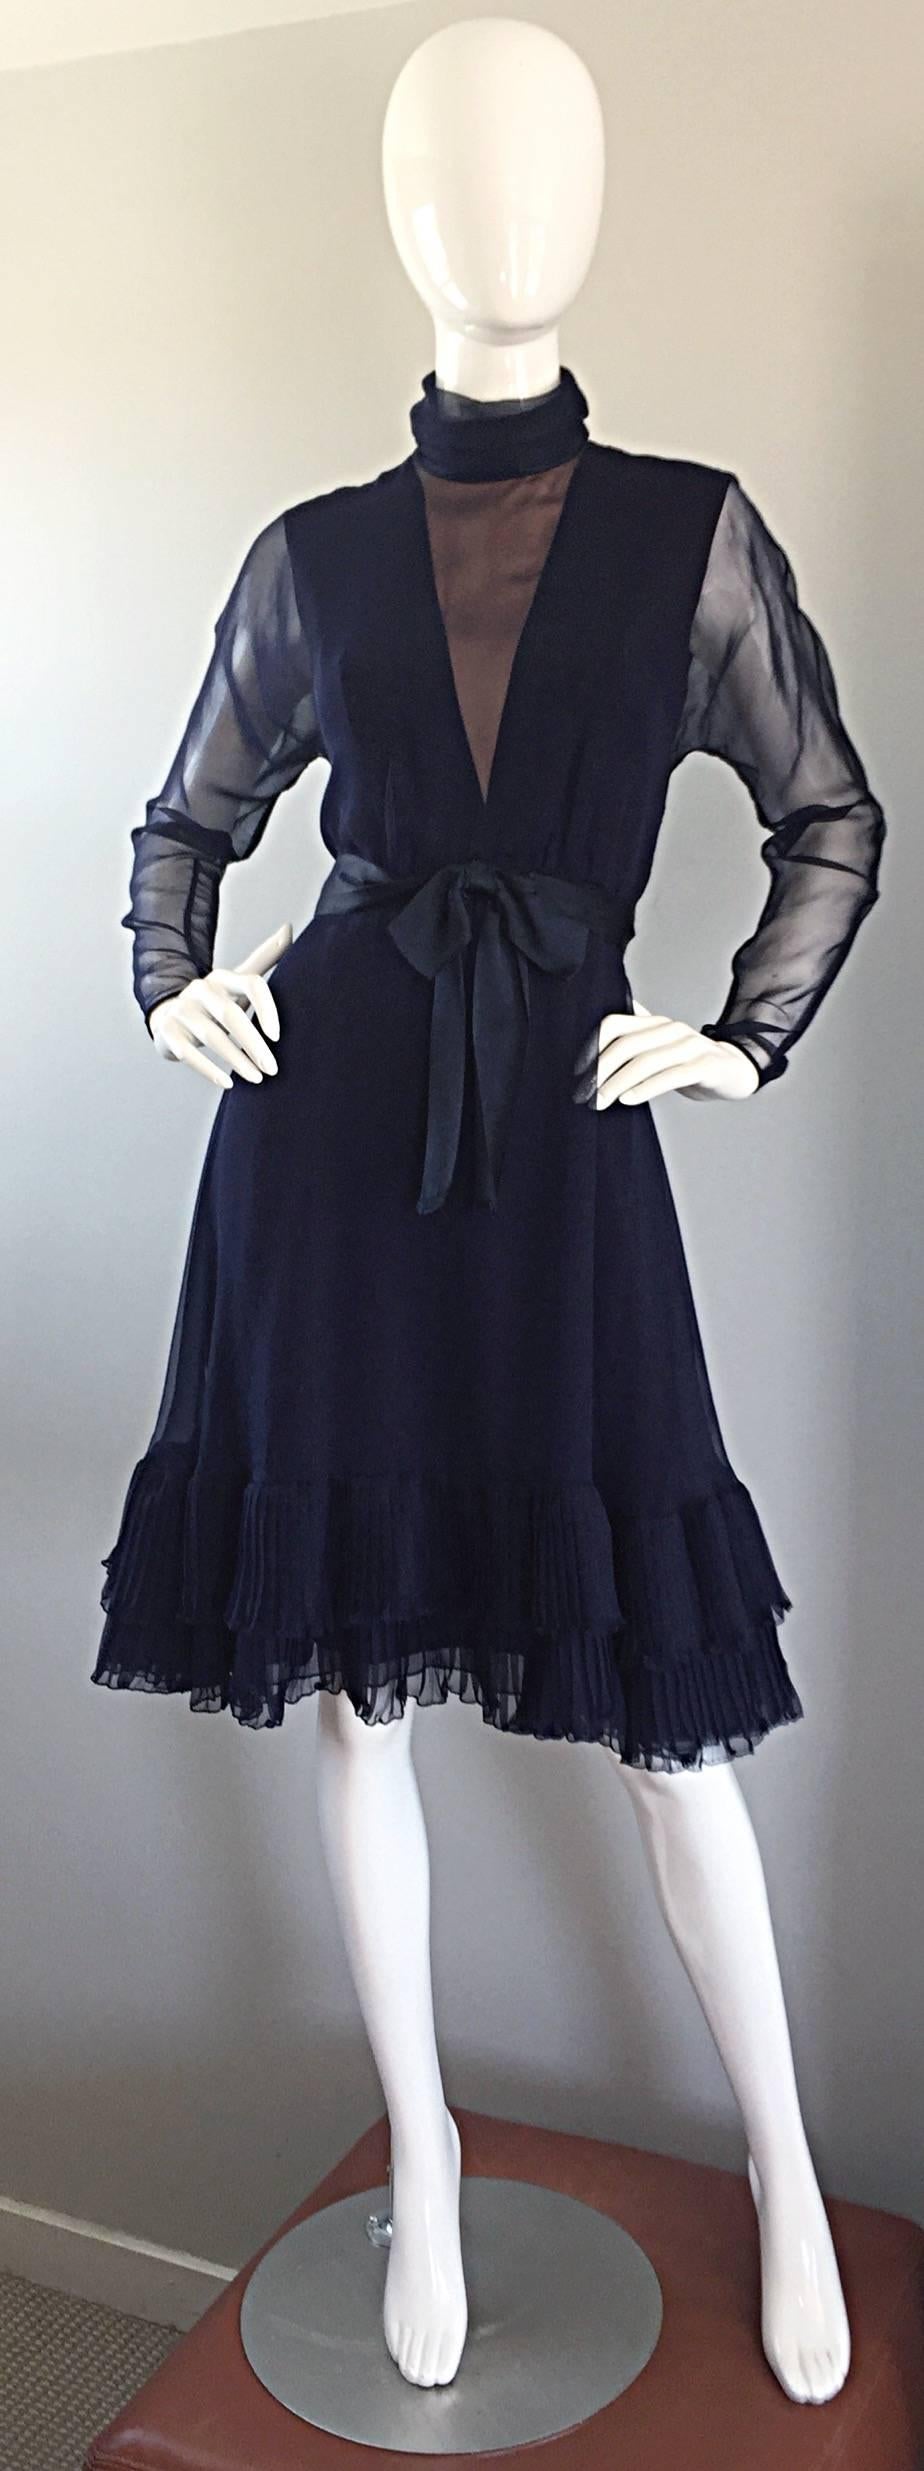 Chic vintage 60s dress from hard to find designer KIKI HART! Beautiful navy blue silk chiffon, with impeccable demi-couture construction! High collar with a nude illusion dip front bust. Semi sheer long dolman chiffon sleeves. Super flattering